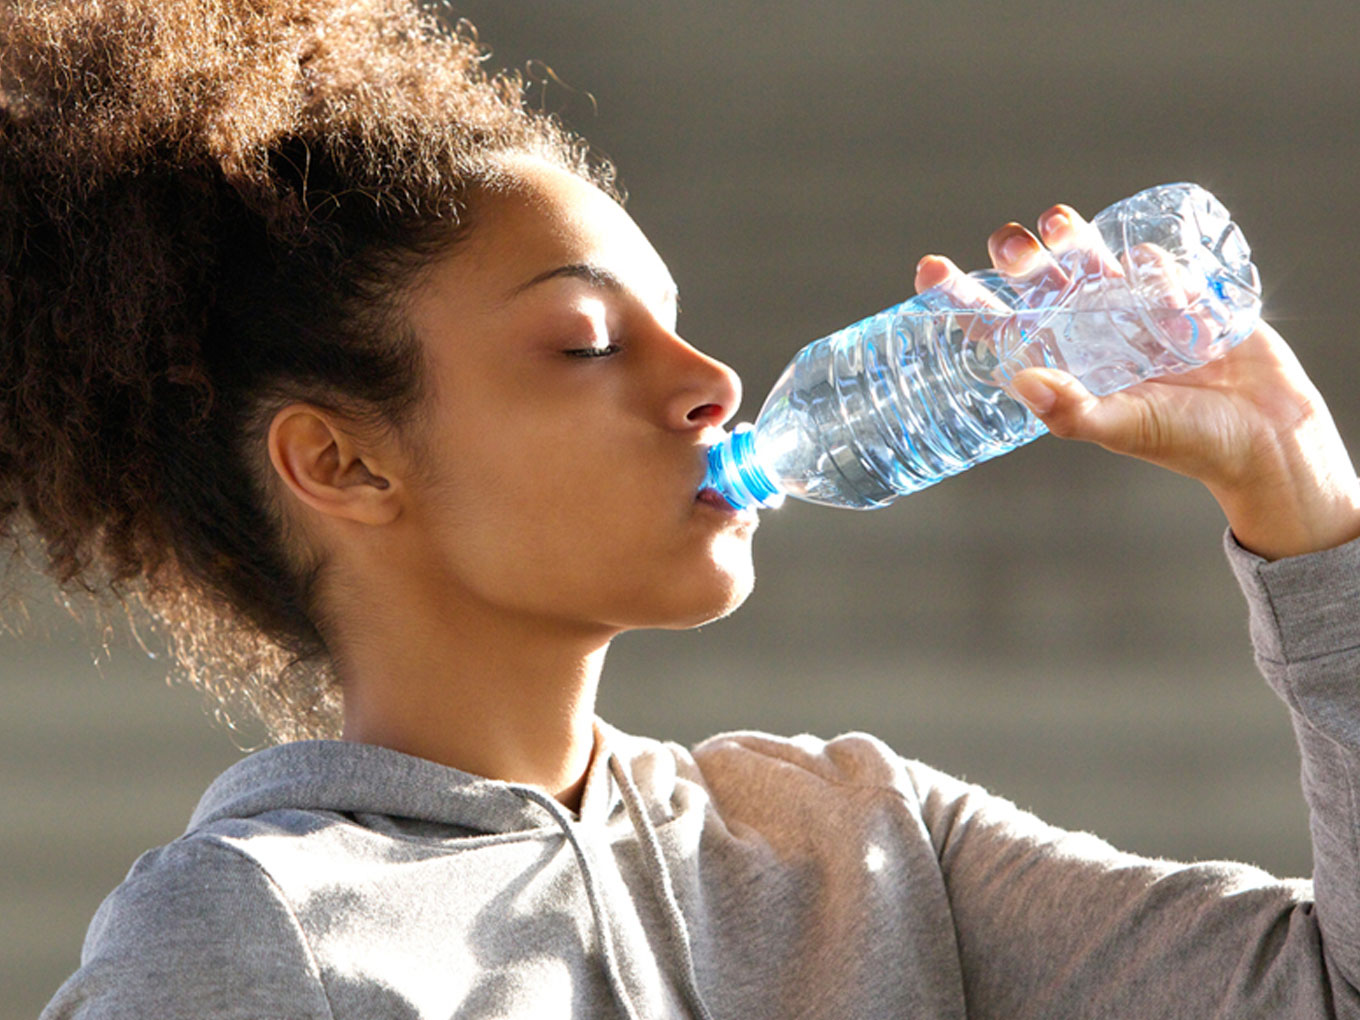 Staying hydrated is important to maintain good health. Drink water or other clear beverages to count towards your daily fluid intake.